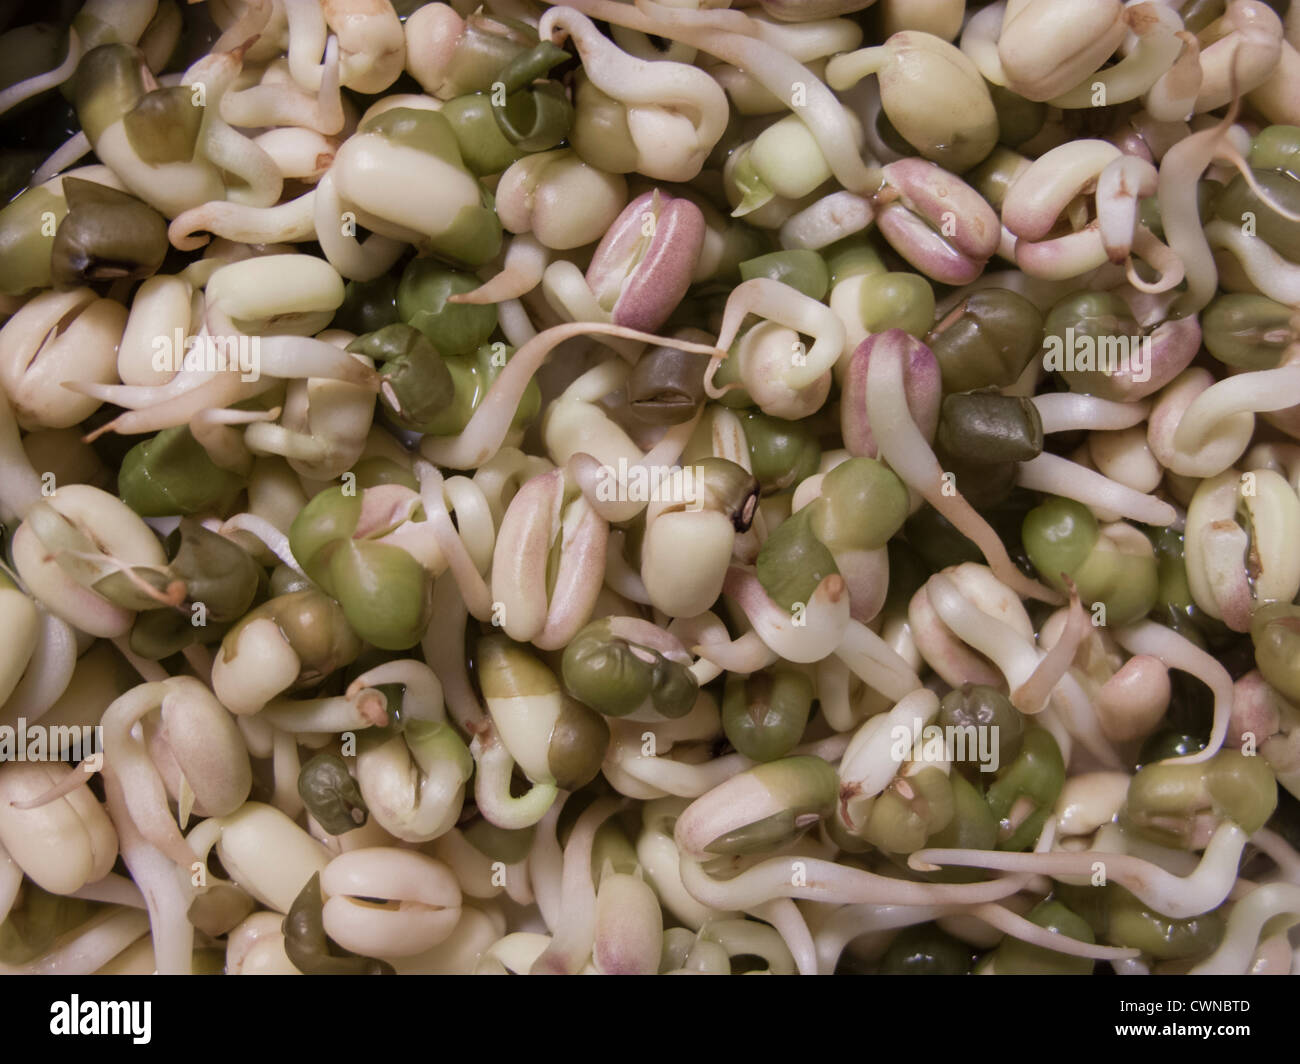 Batch of germinated soya sprouts for food. Stock Photo